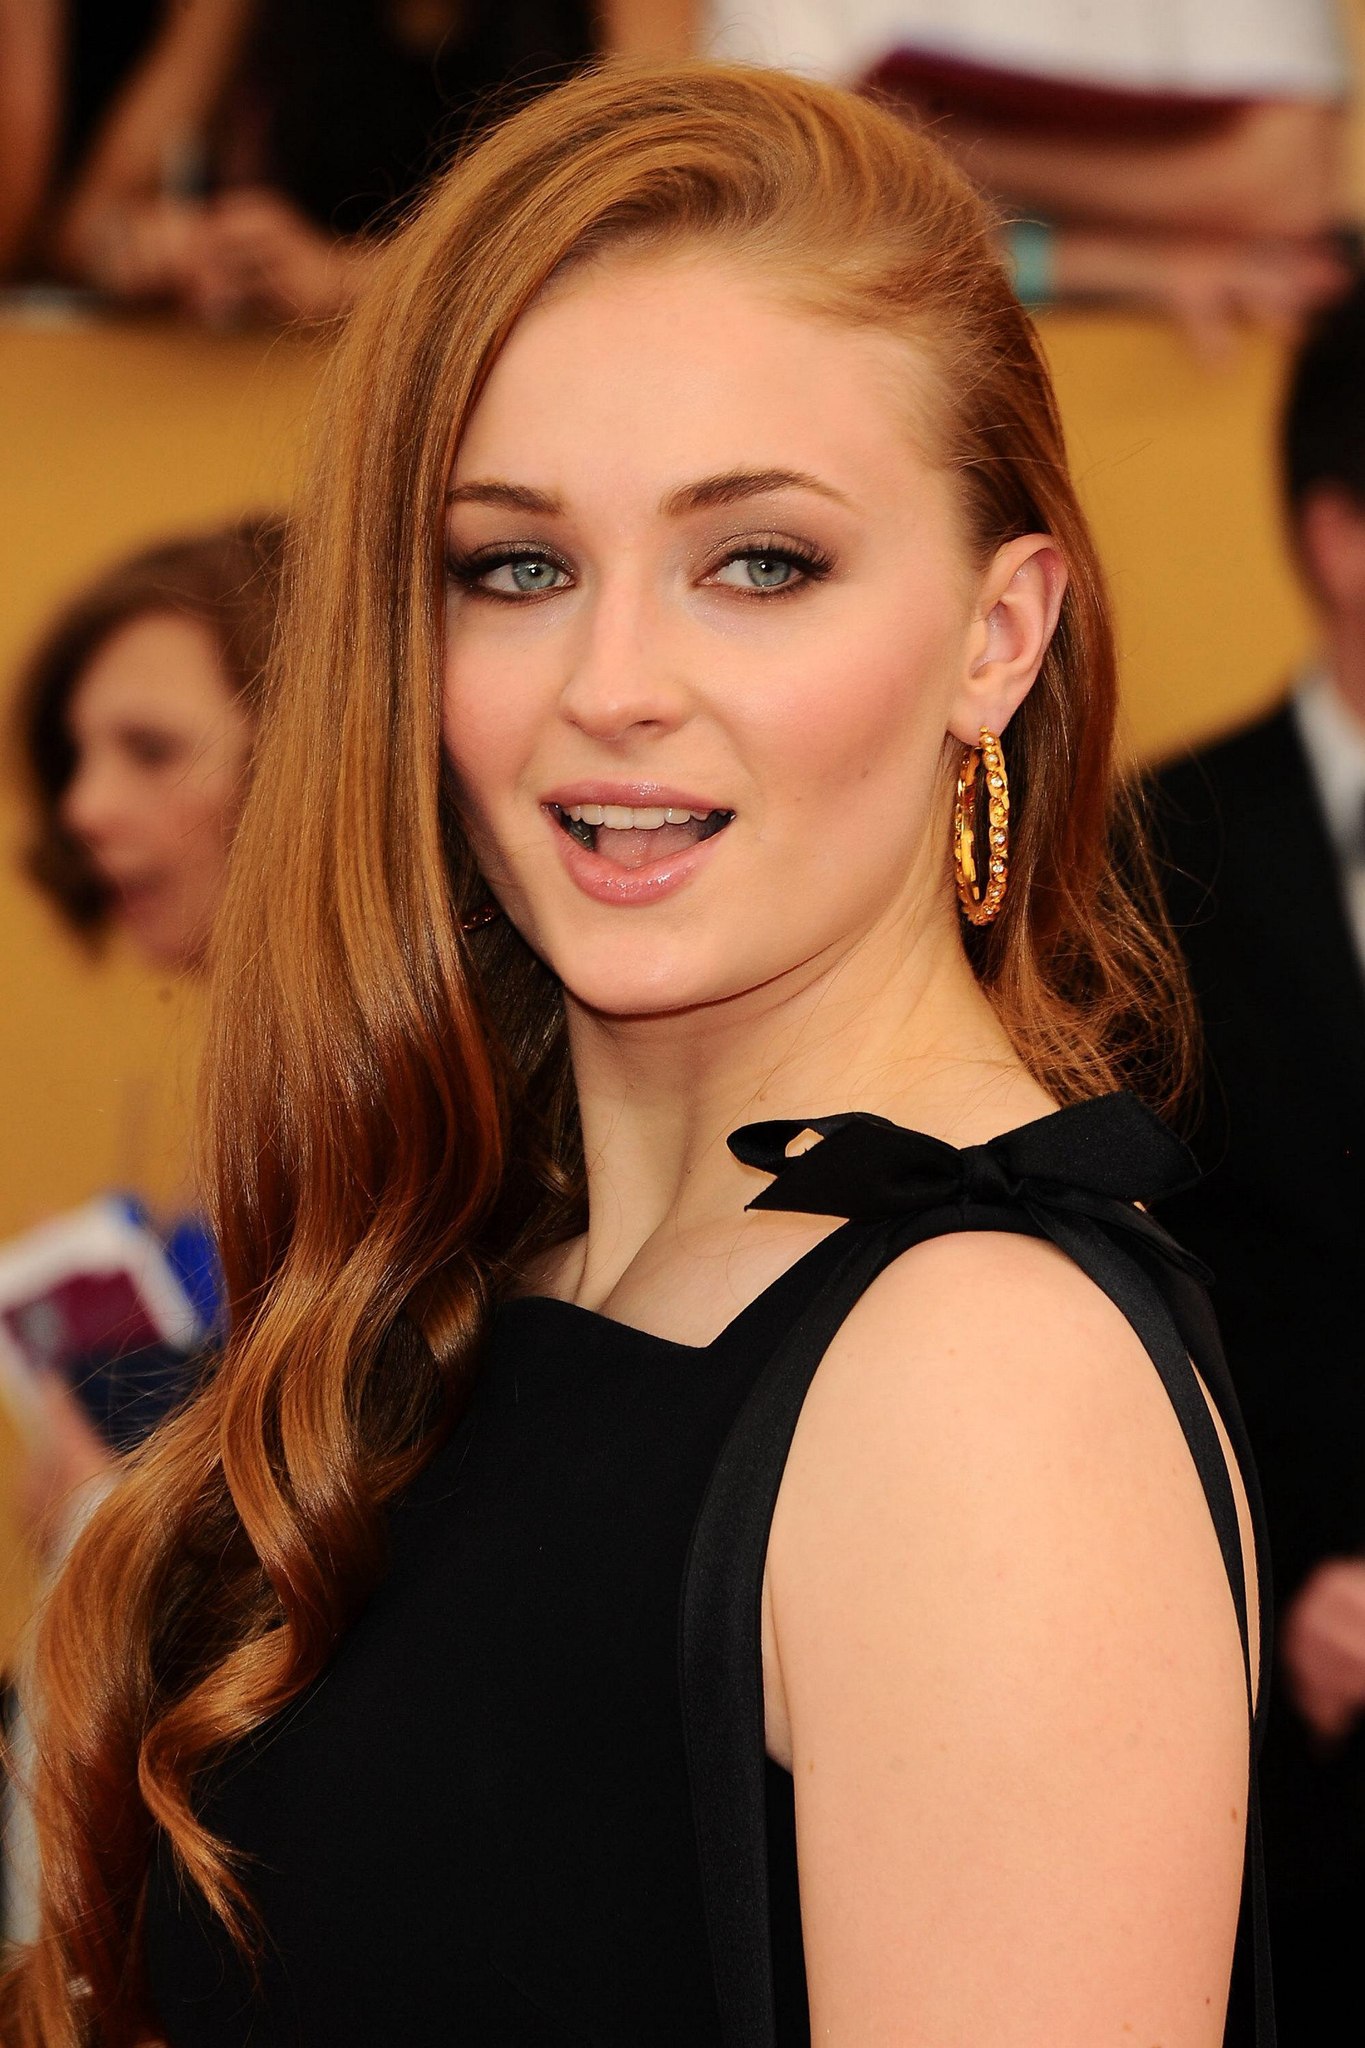 Sophie Turner (actress) photo 445 of 967 pics, wallpaper - photo #757030 - ThePlace21365 x 2048